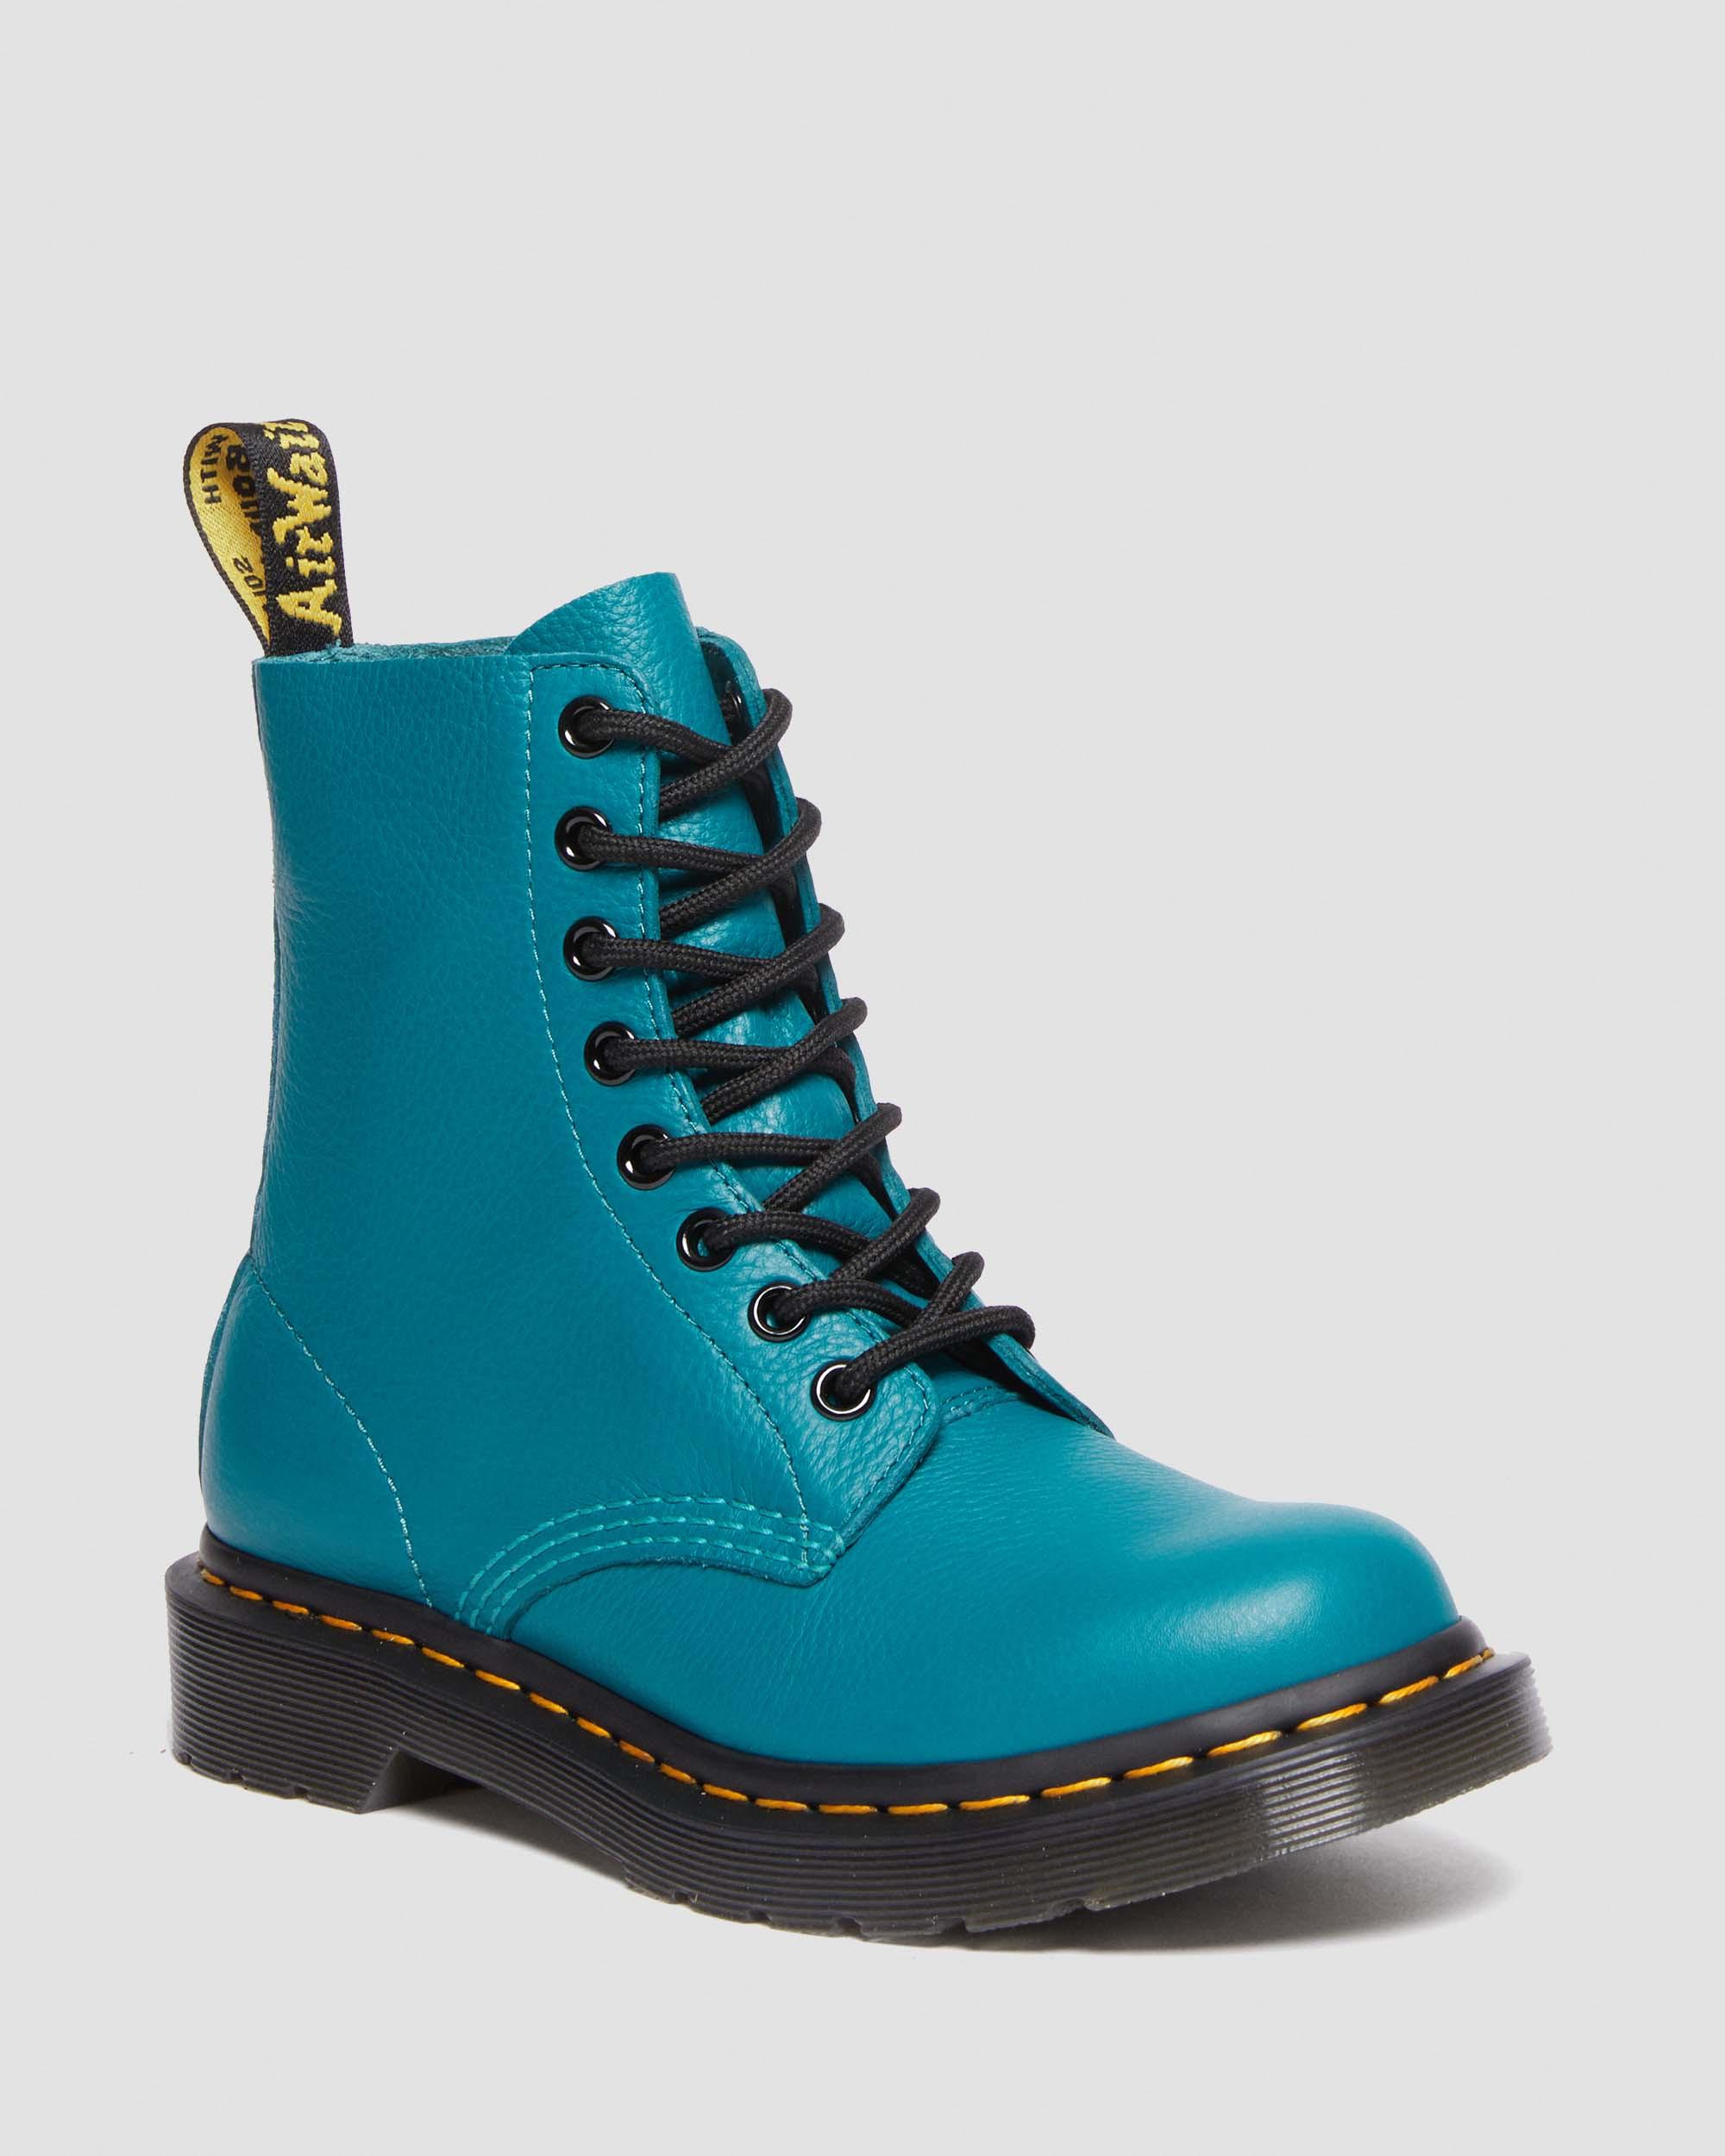 Doc Martens review: Are the 1460 Pascal Virginia boots comfortable